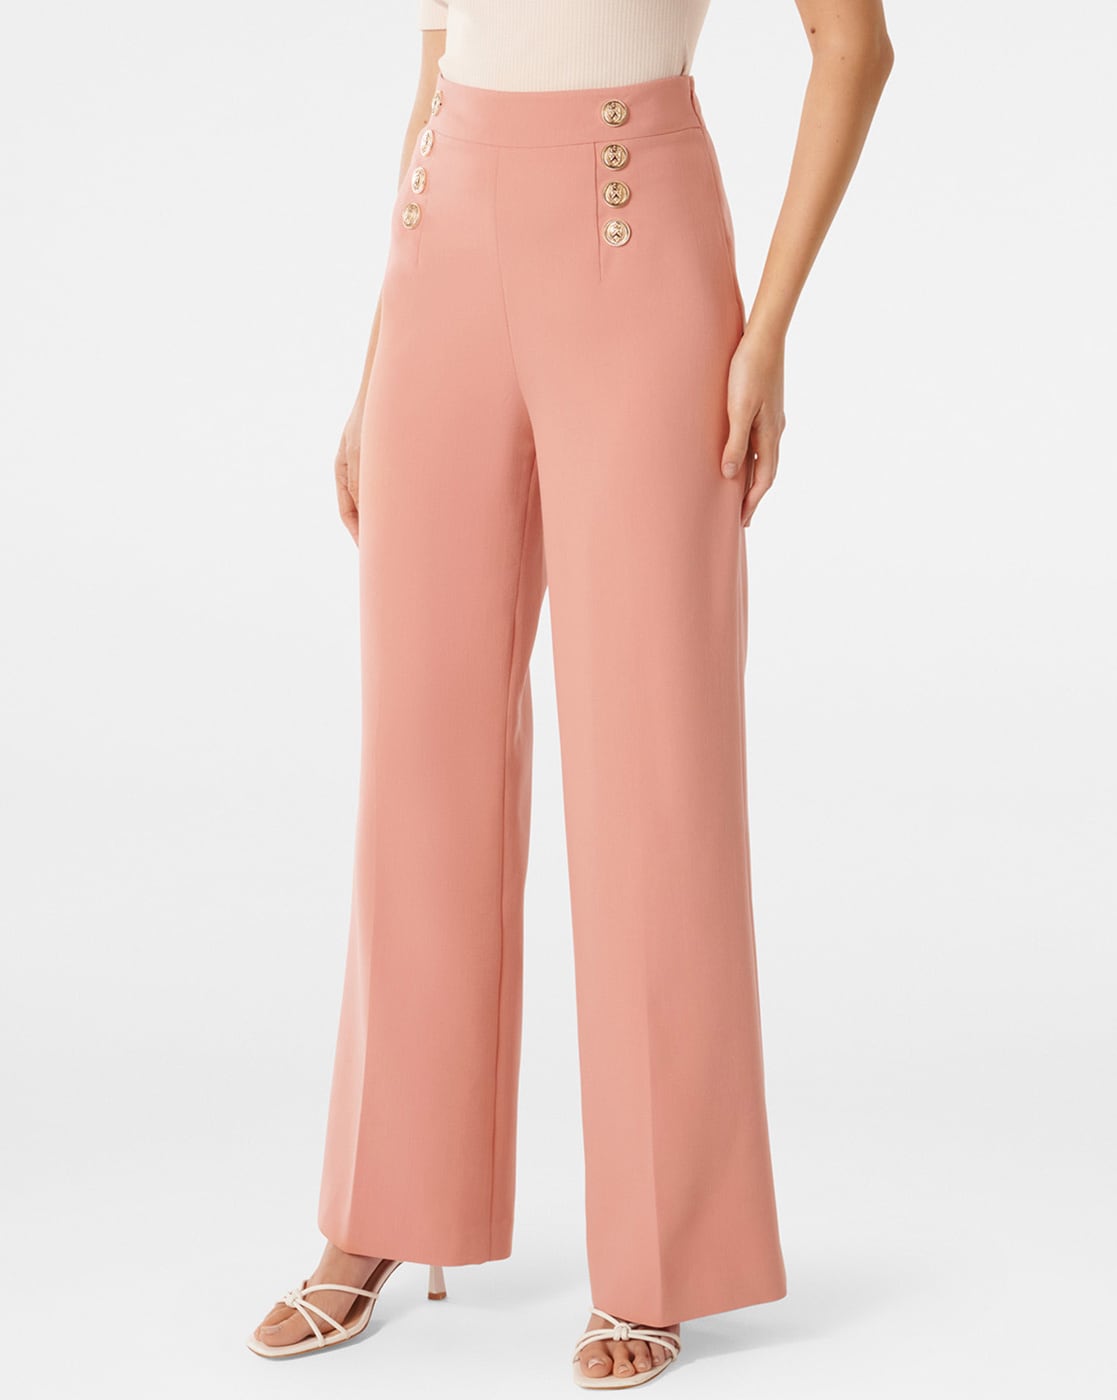 NEON & NYLON Bright Pink Fold Over Trousers | New Look